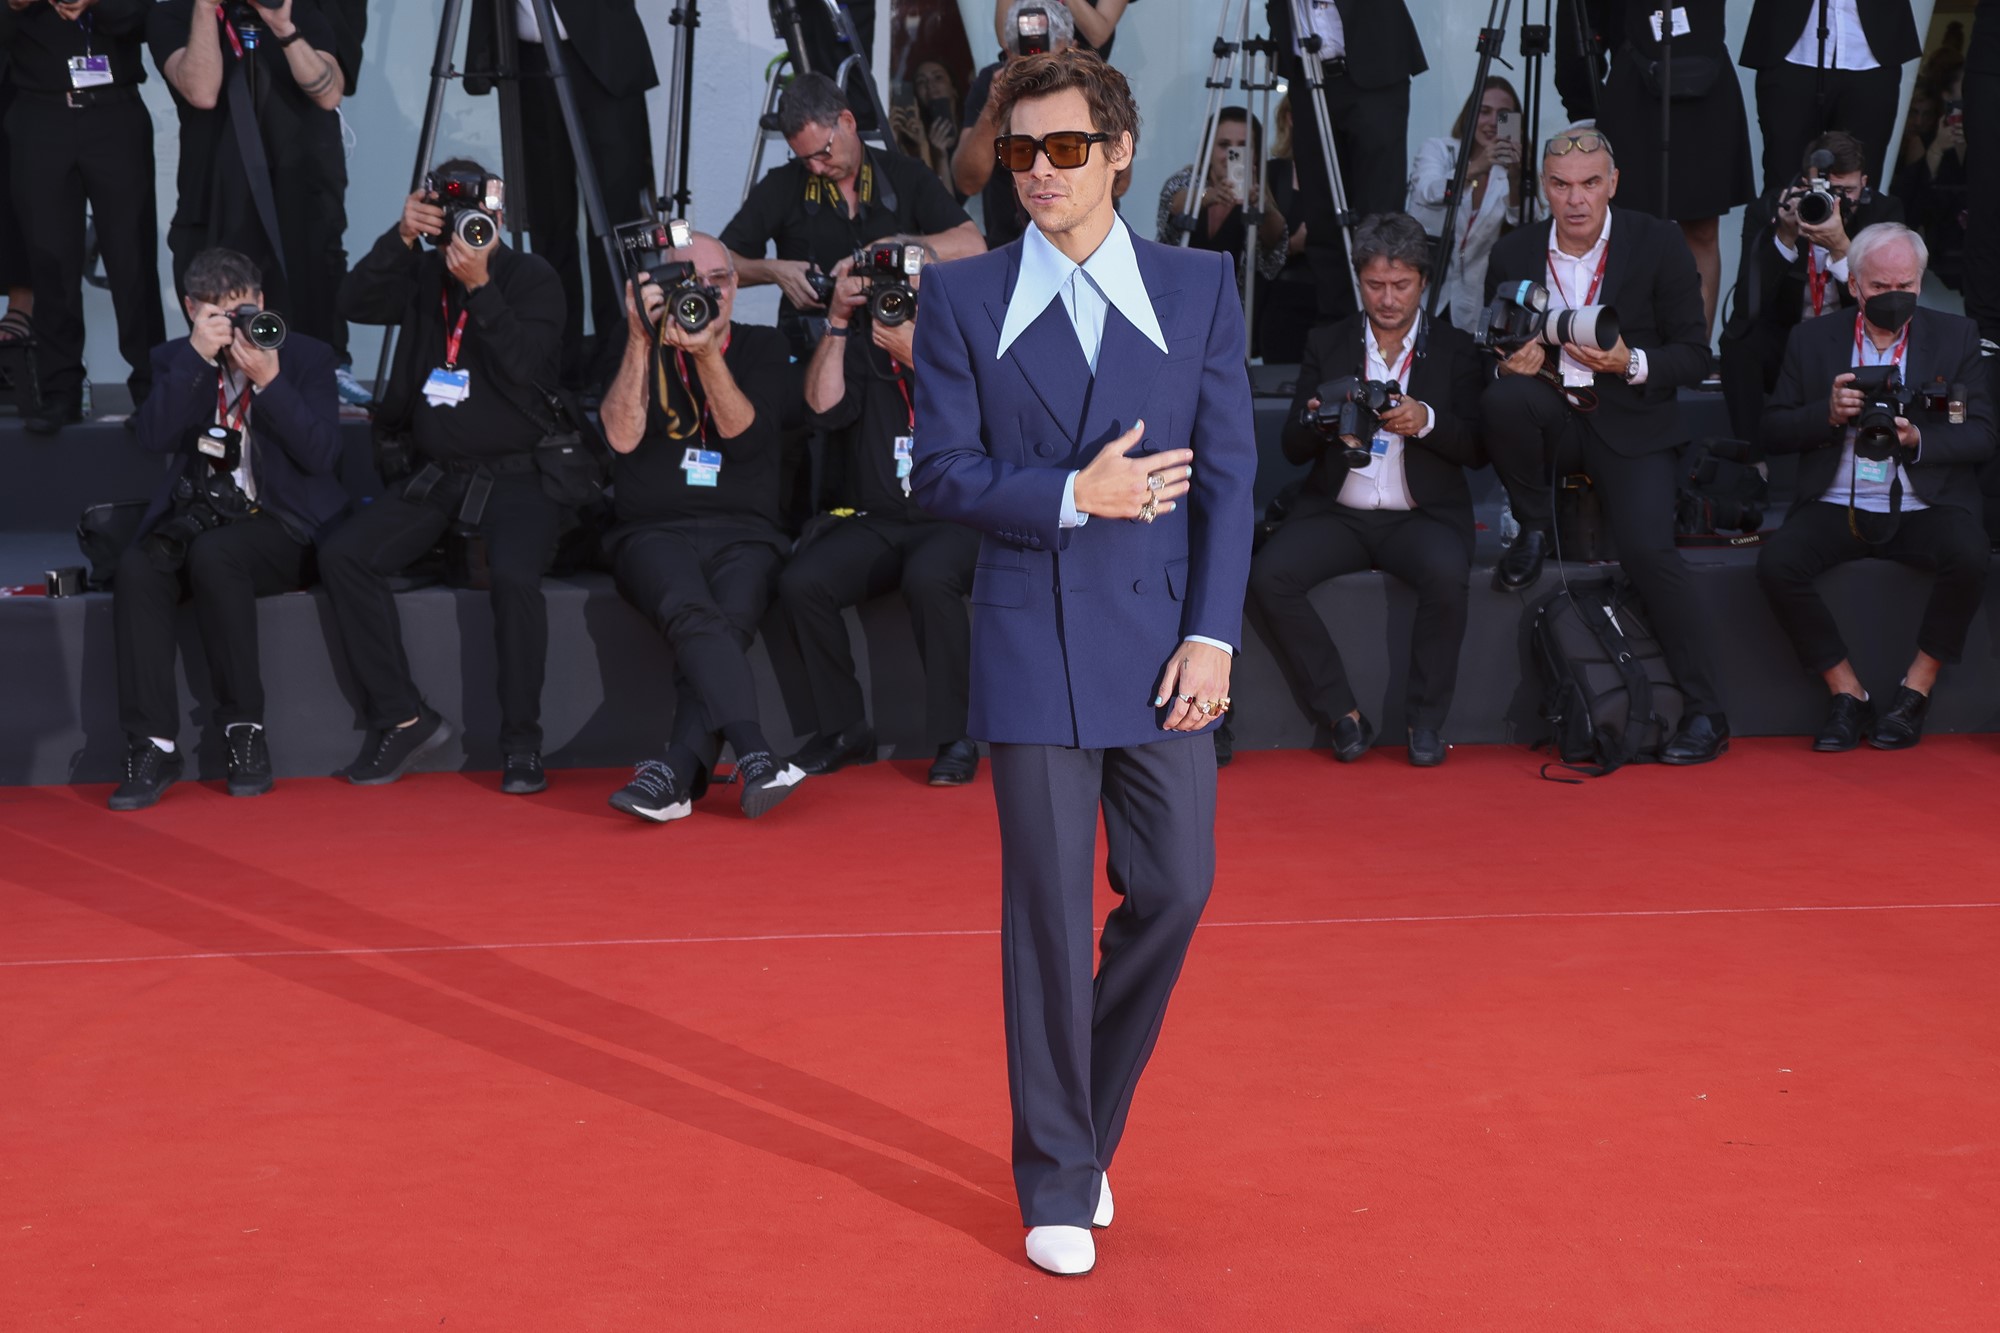 Harry Styles poses on red carpet wearing navy suit and shirt with oversized collar